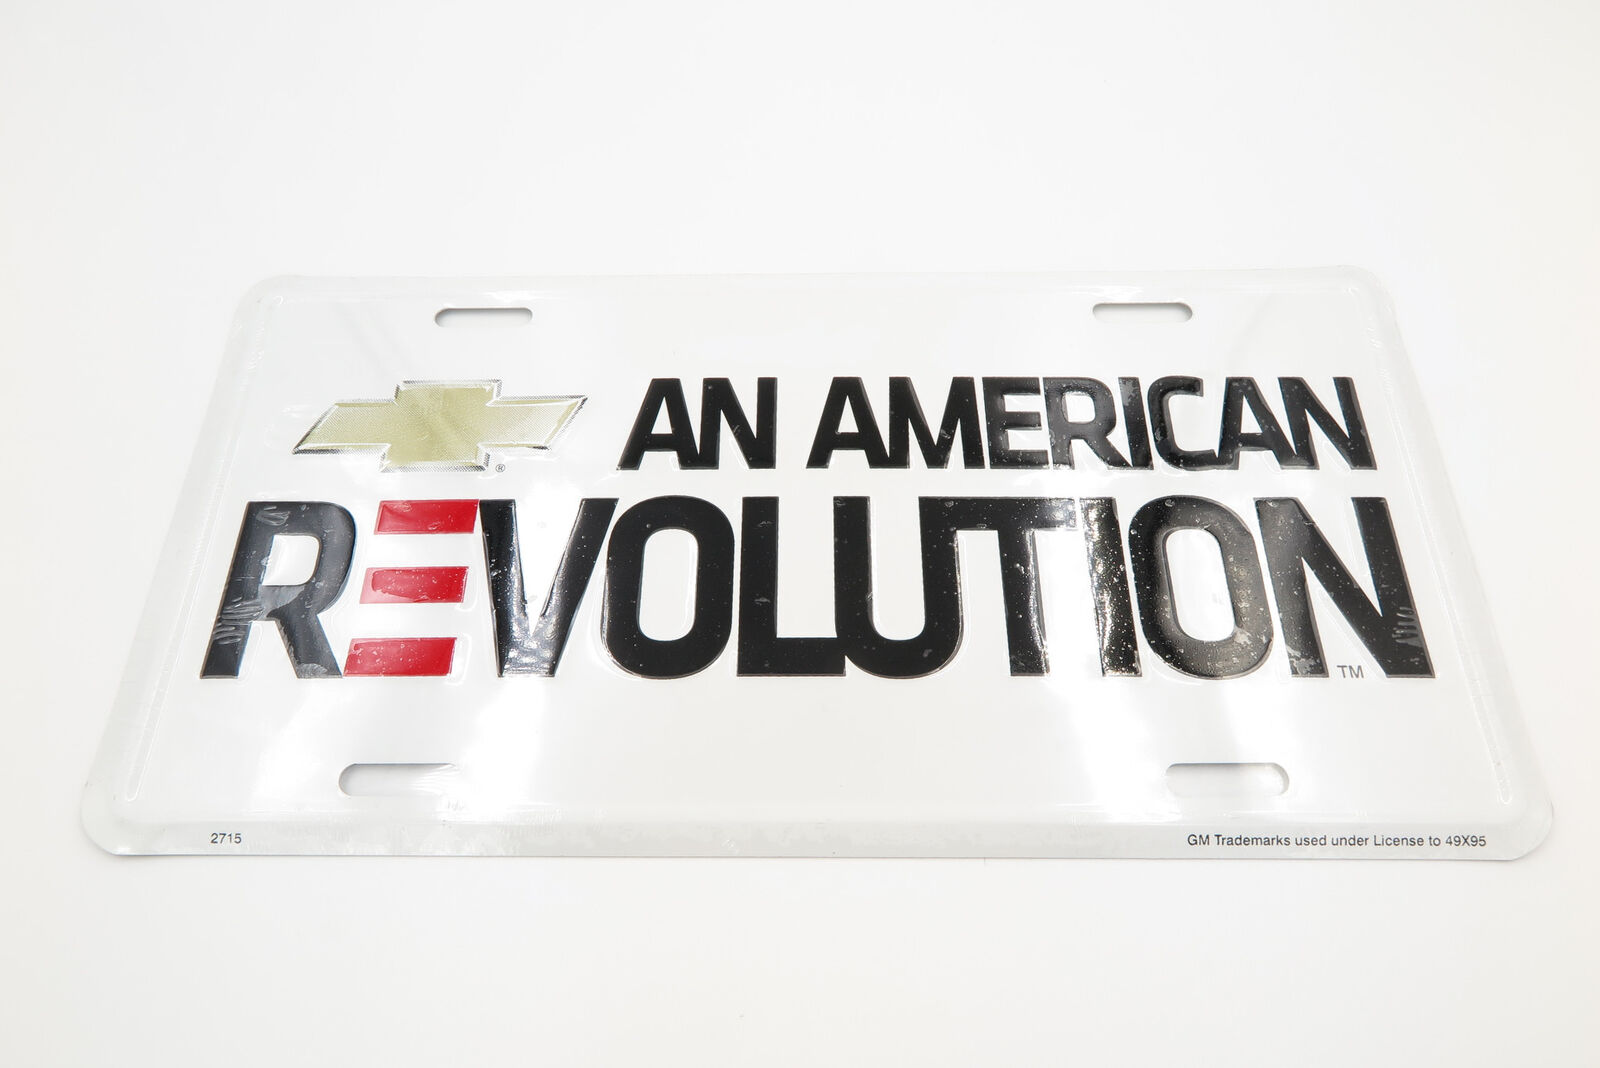 Chevy Chevrolet American Revolution Aluminum Metal Car License Plate Sign Tag